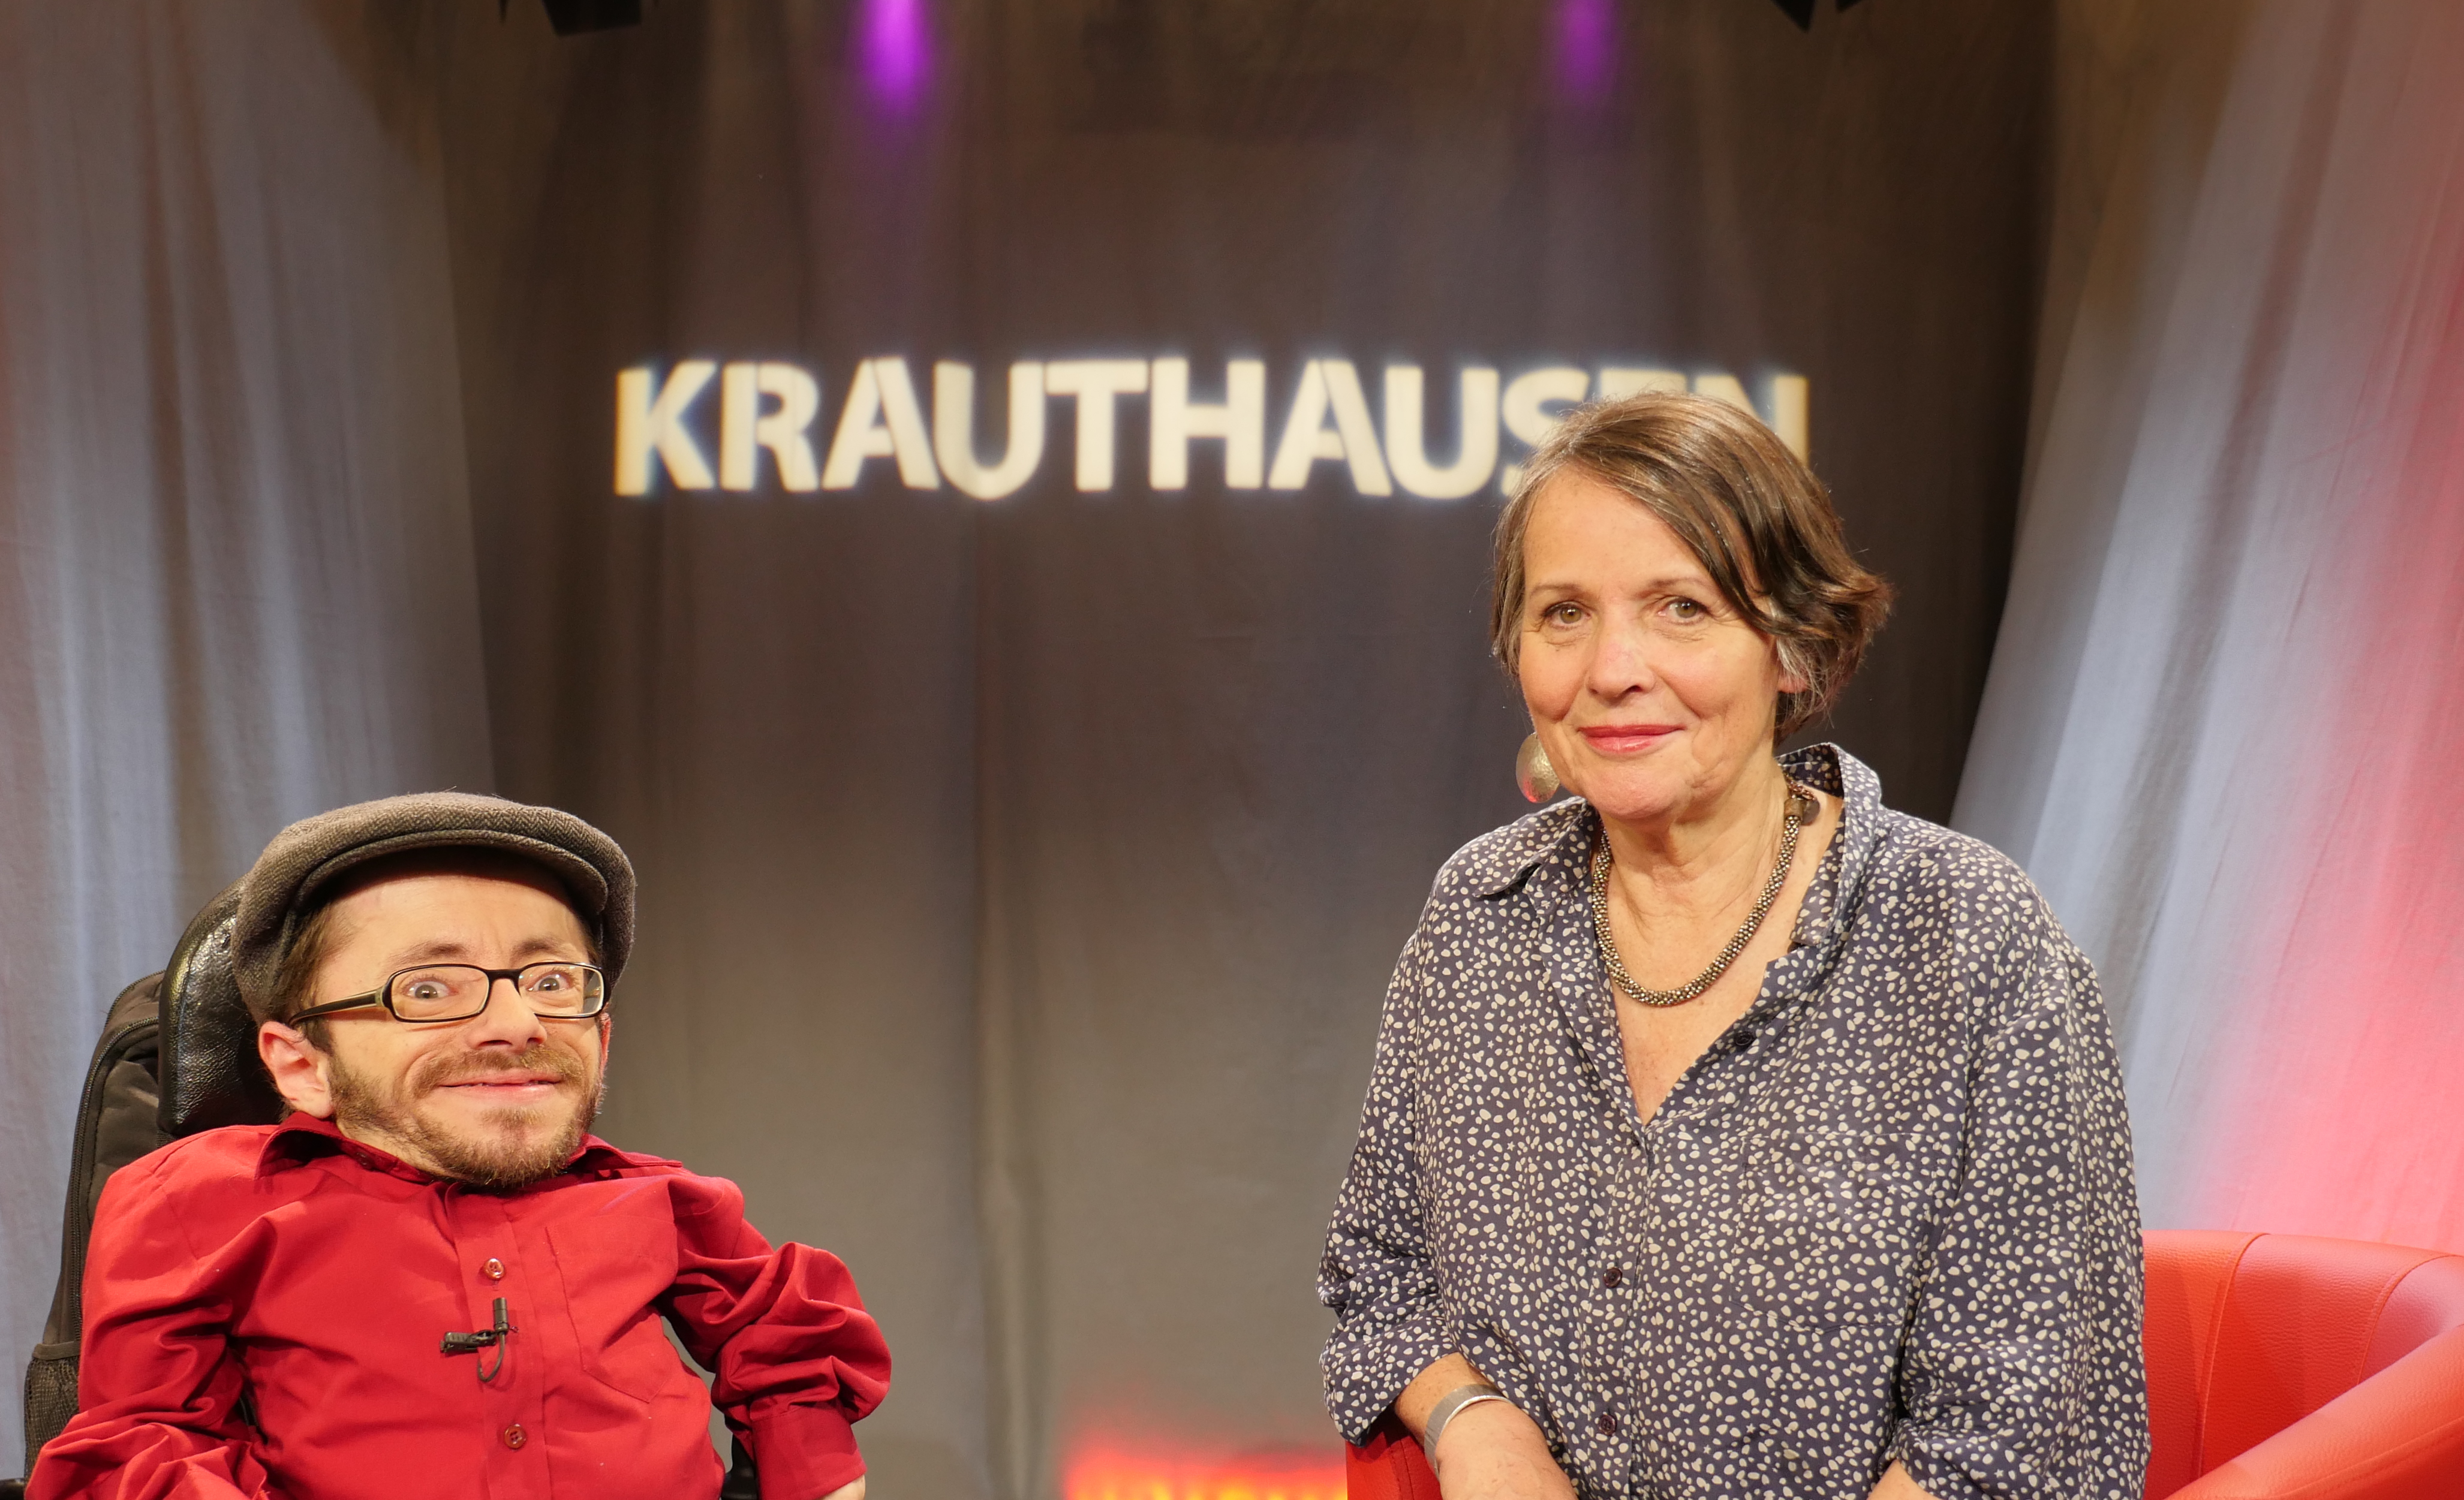 KRAUTHAUSEN – face to face: Gisela Höhne vom inklusiven Theater RambaZamba